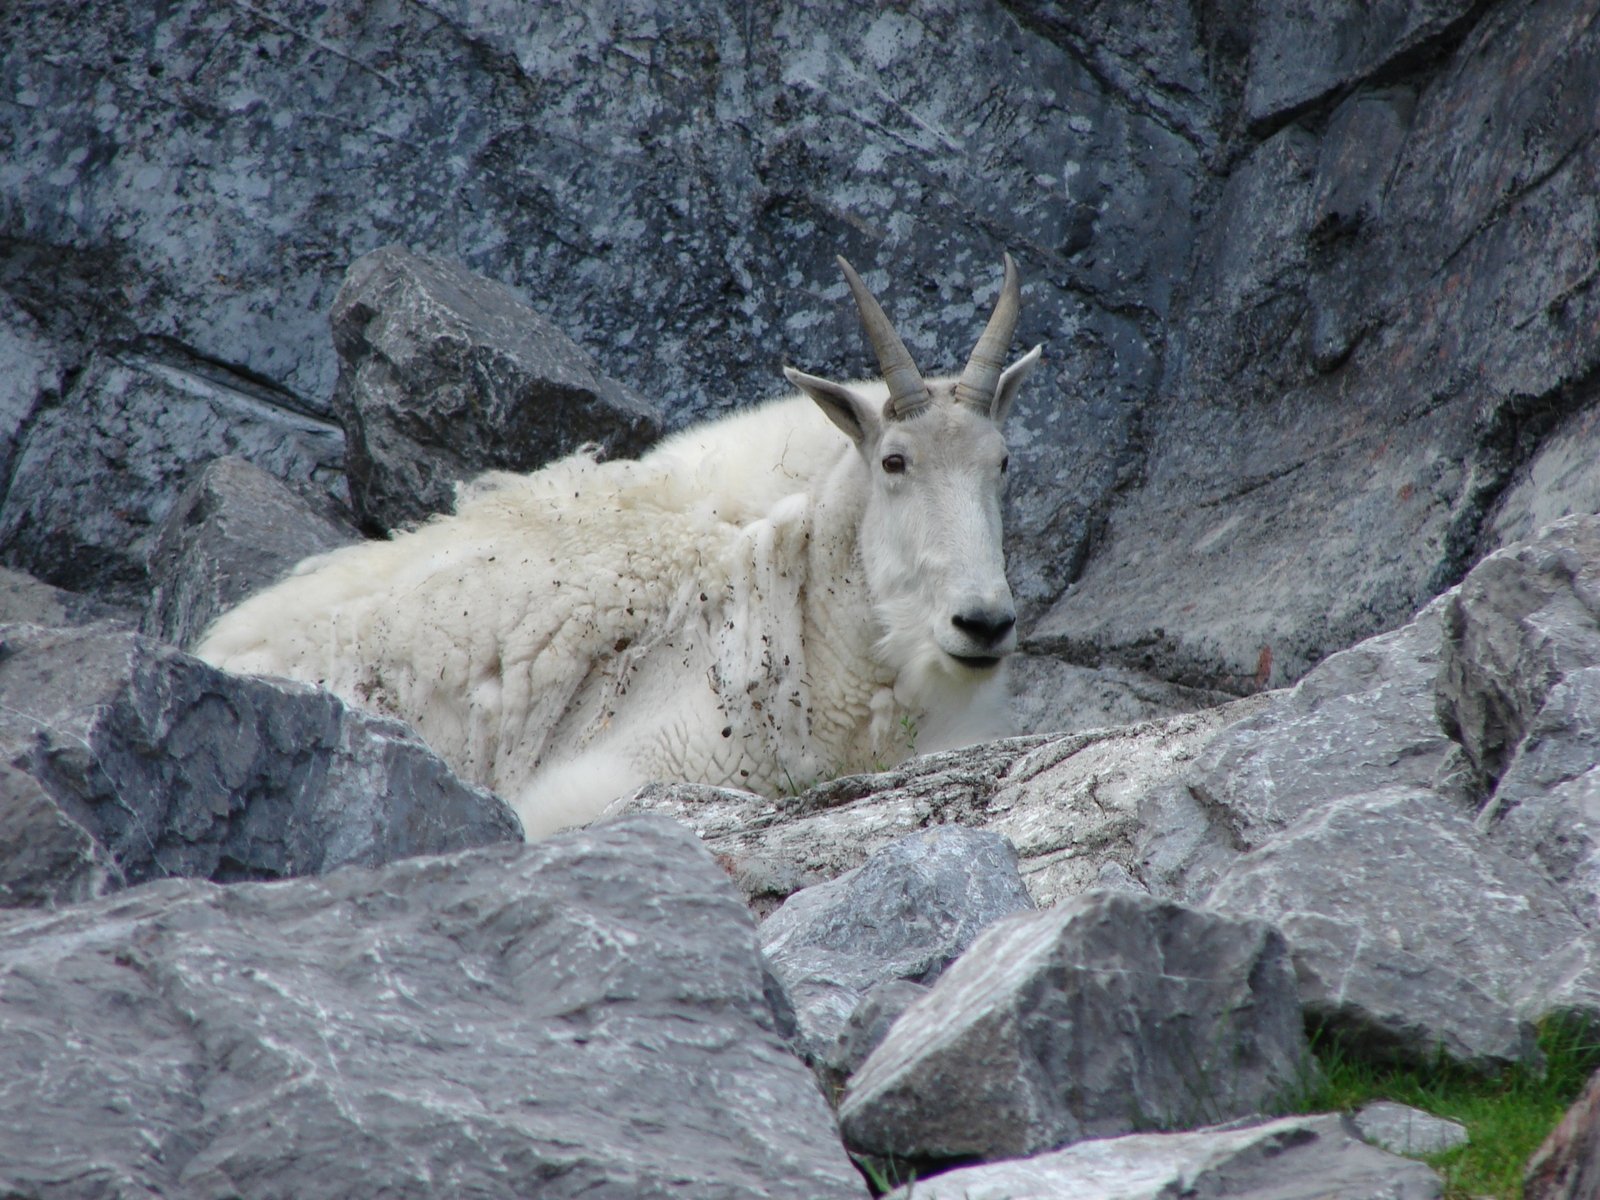 a mountain goat resting on some rocks near the ocean